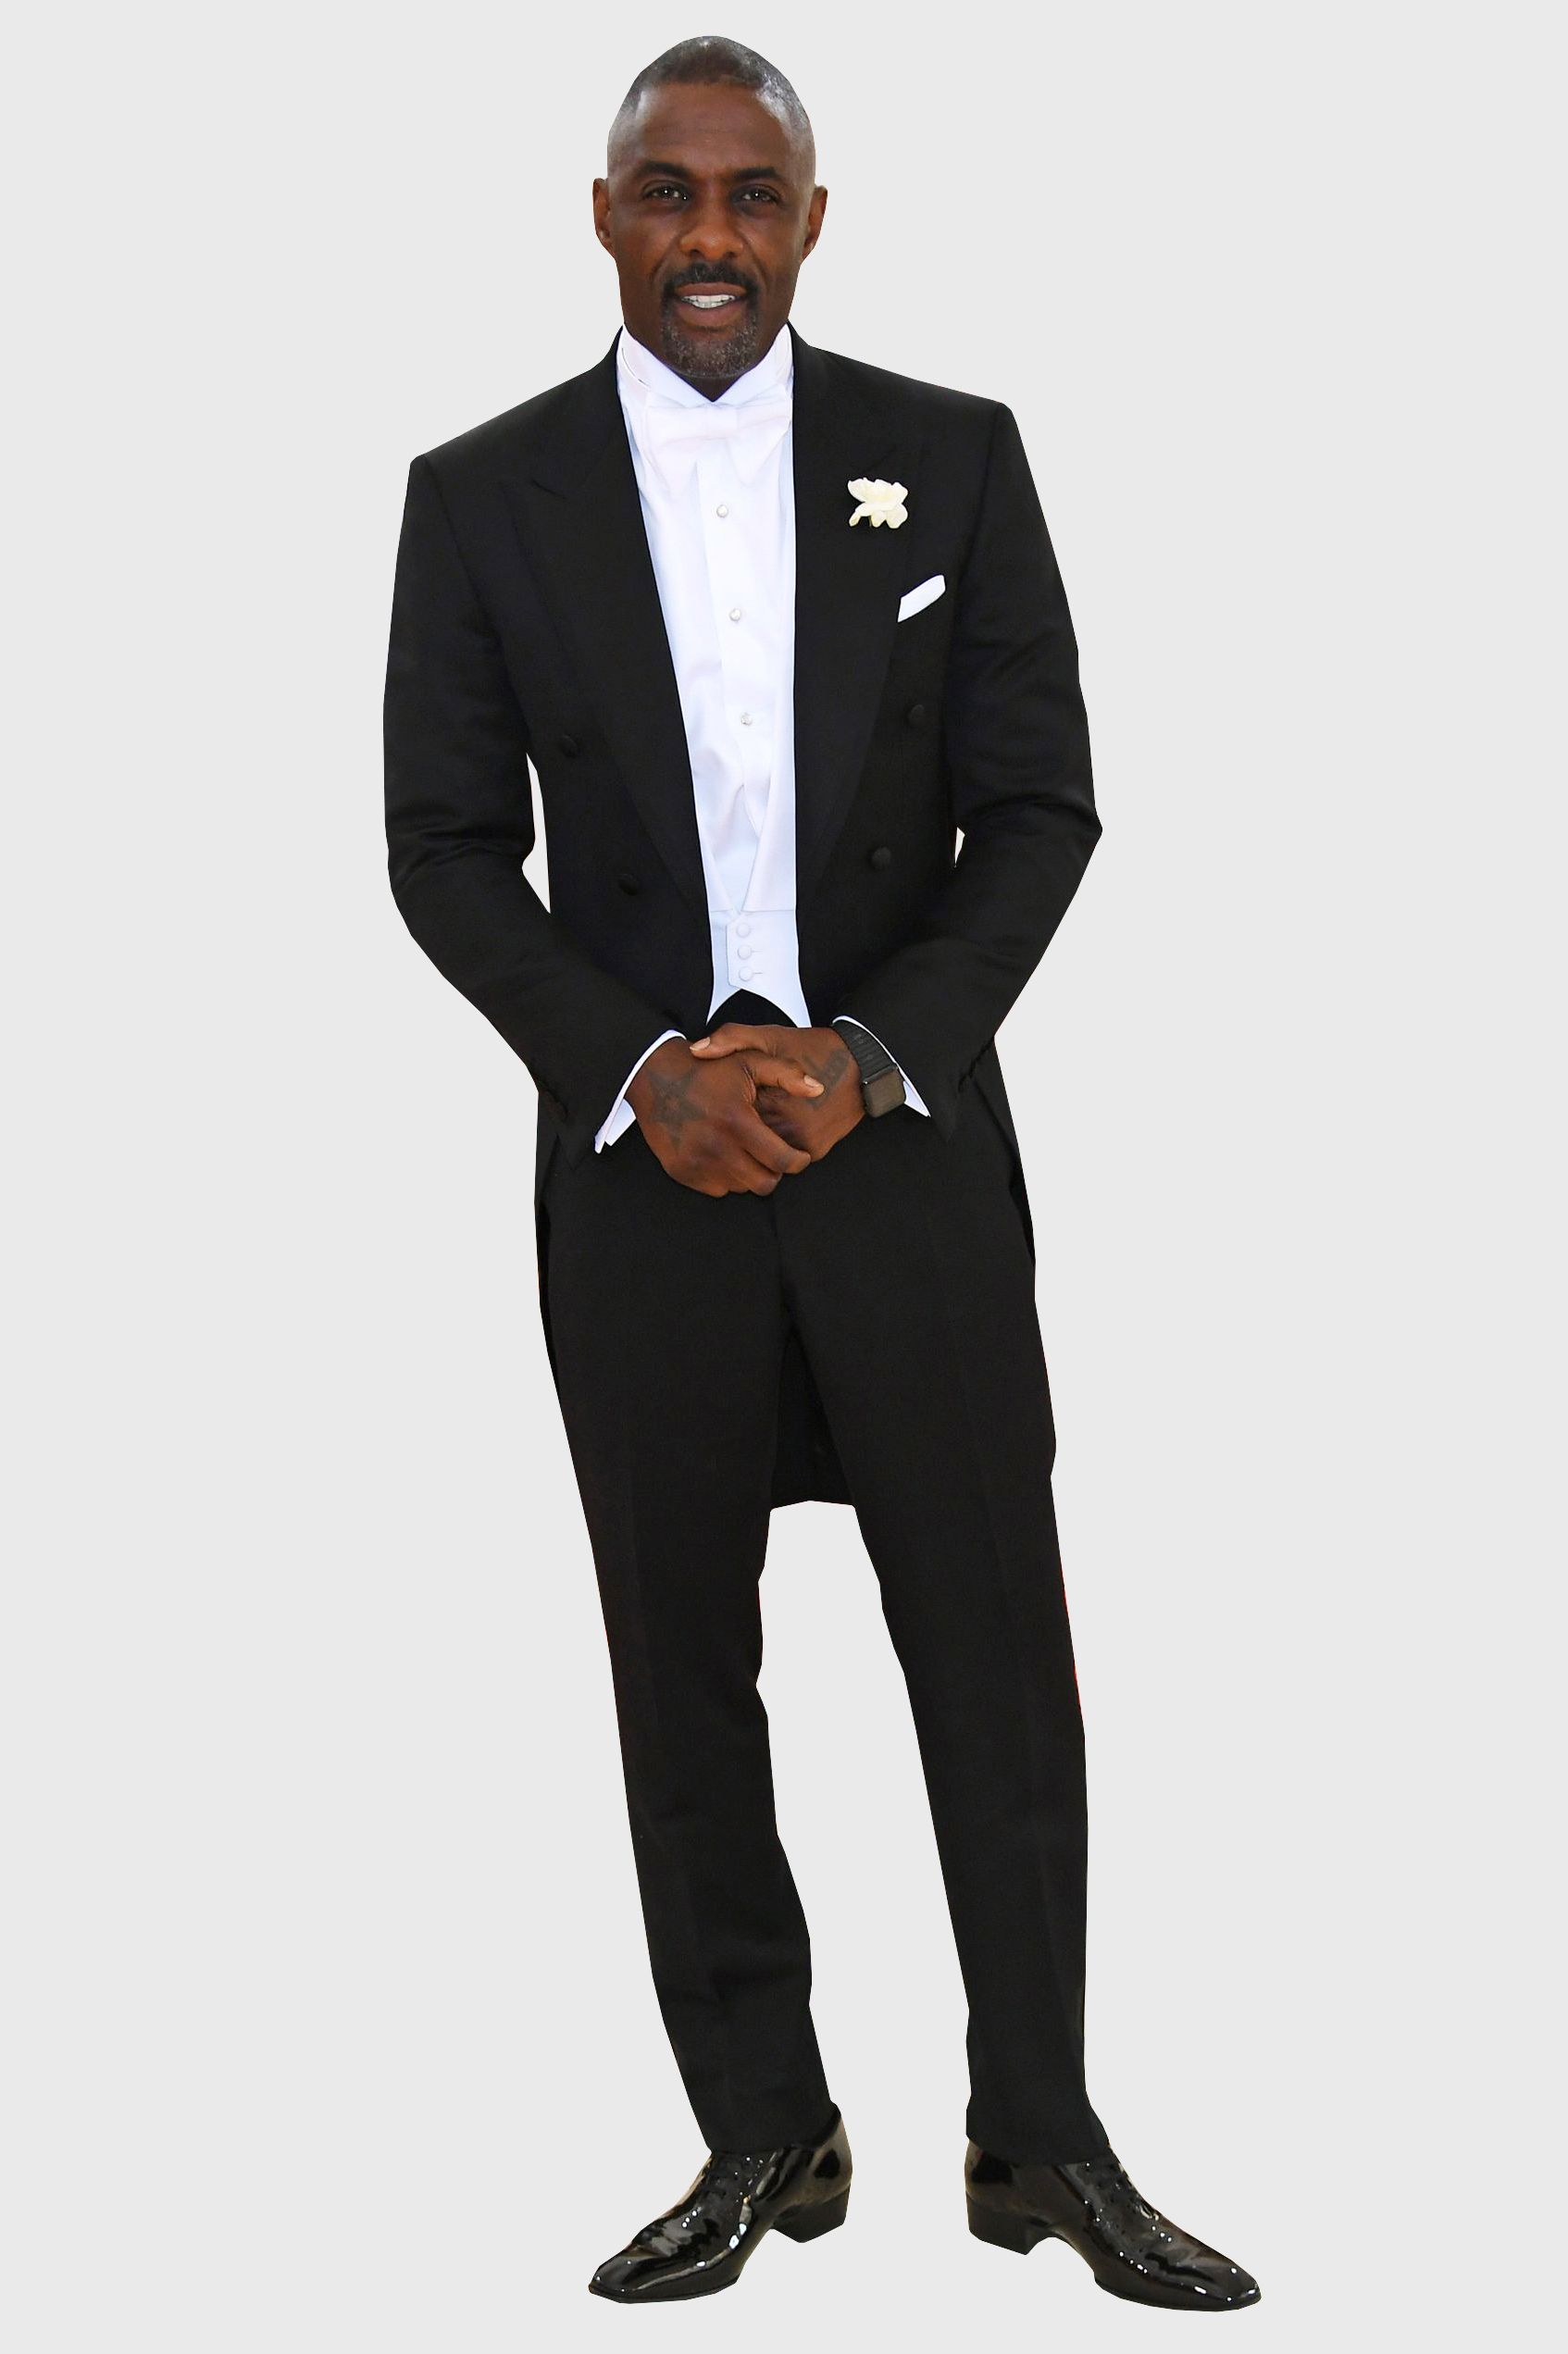 The Definitive Guide to Wedding Guest Dress Codes for Men - Proper